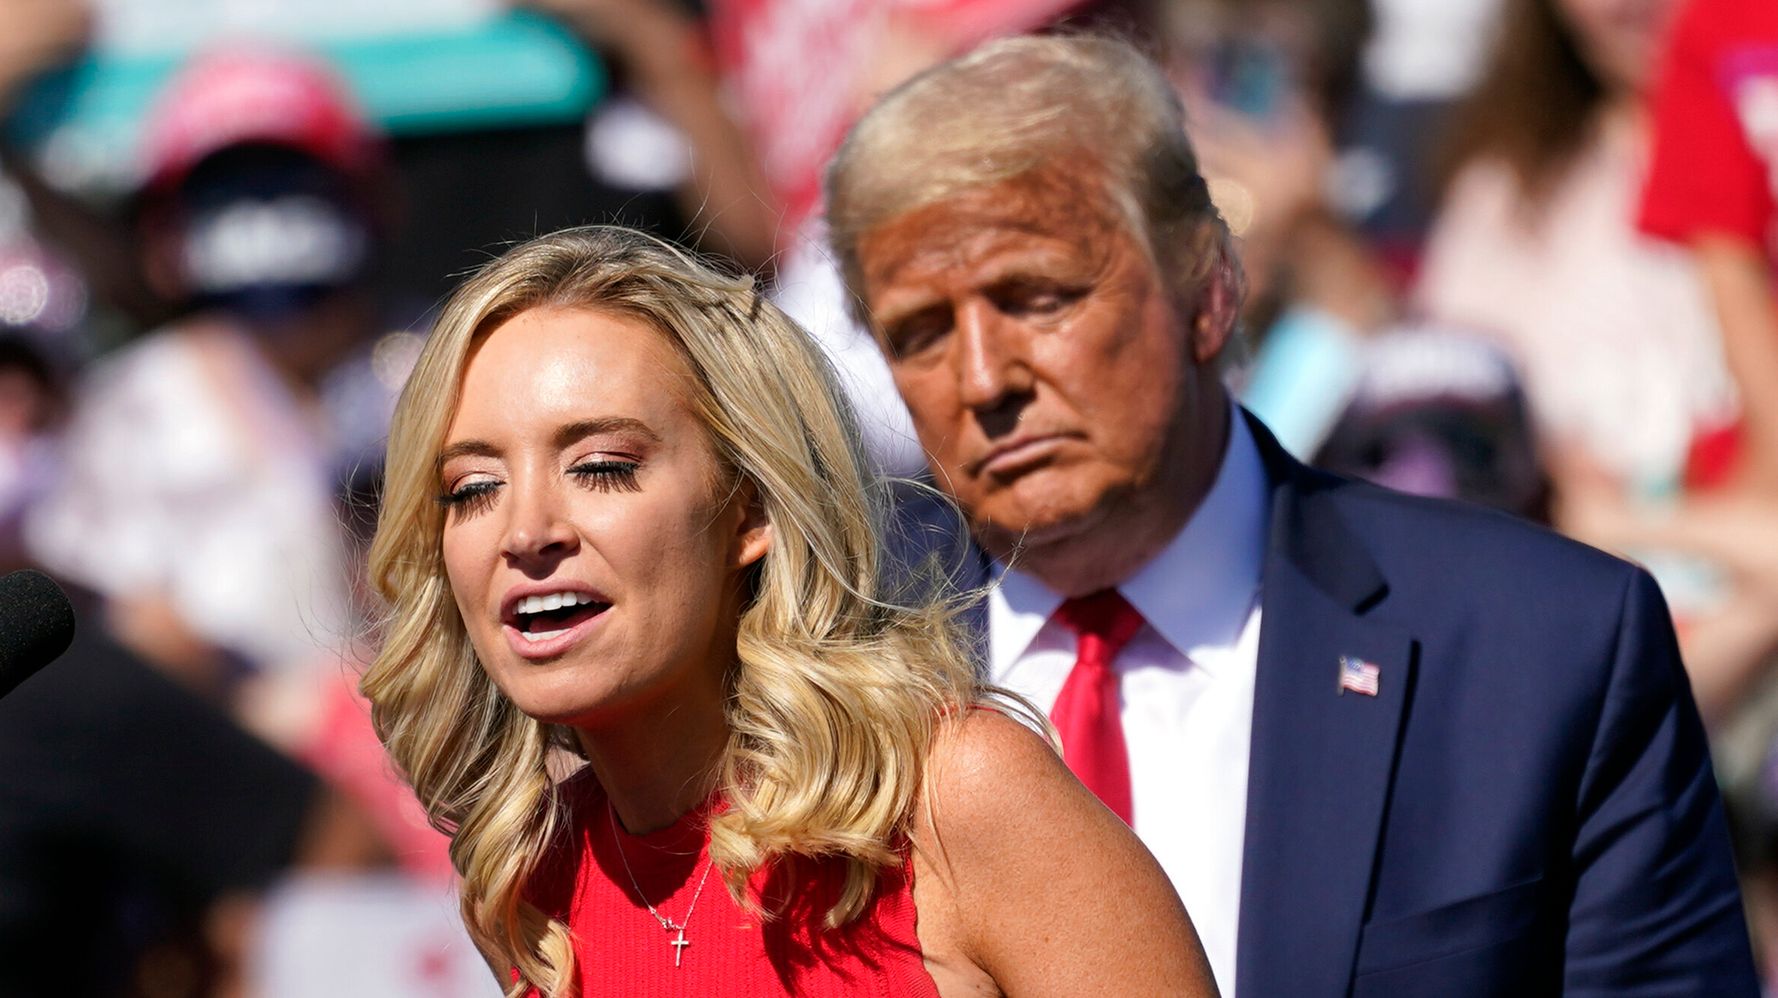 Kayleigh McEnany Breaks White House Whopper Record With MAGA Crowd Tally